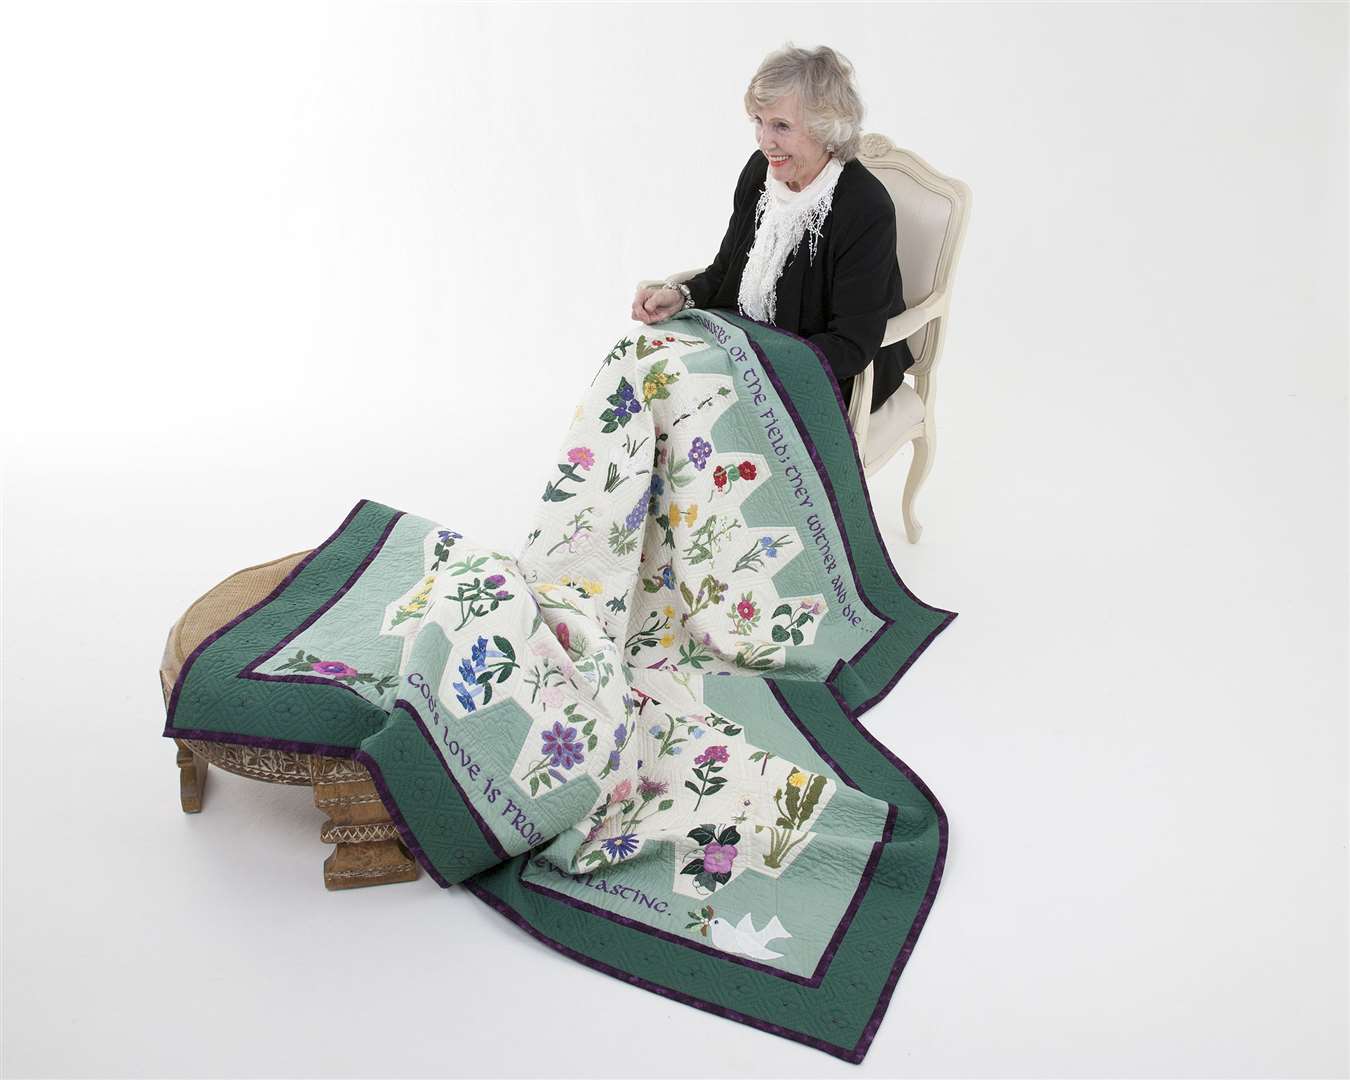 Rosemary was a keen quilter, having co-founded a countywide group for fellow enthusiats and sold patchworks to London stores